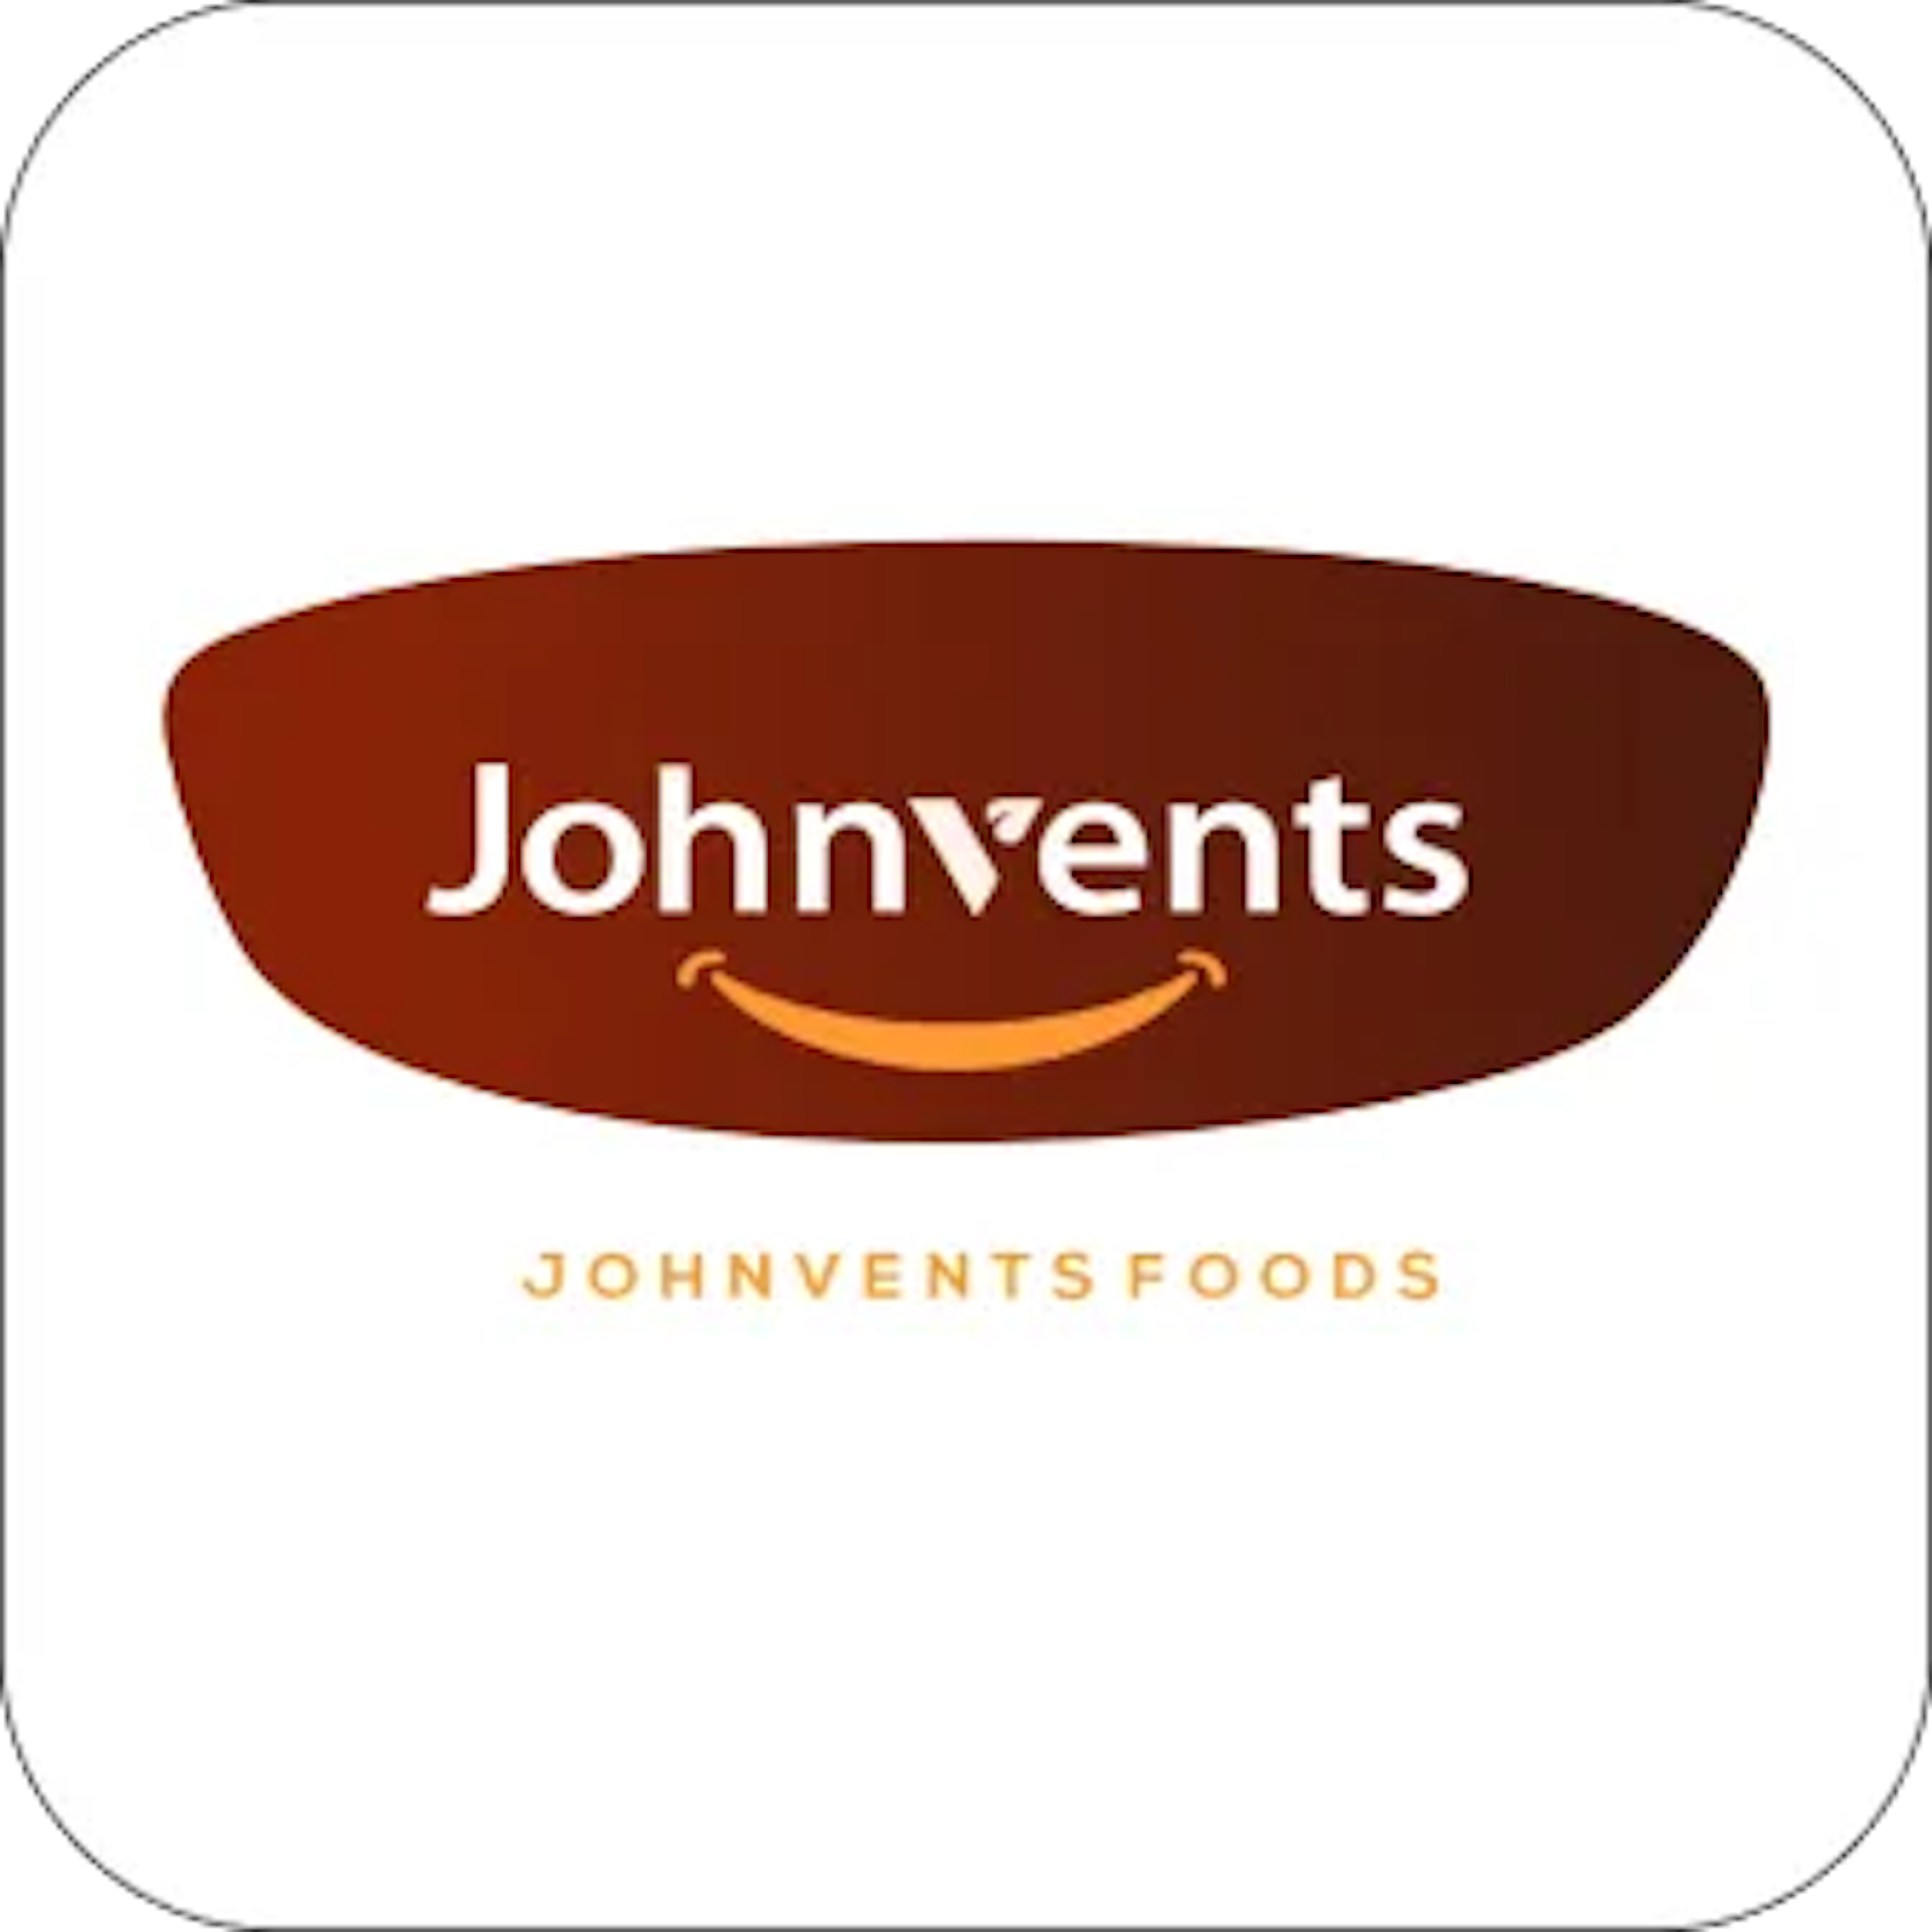 Johnvents Foods Limited